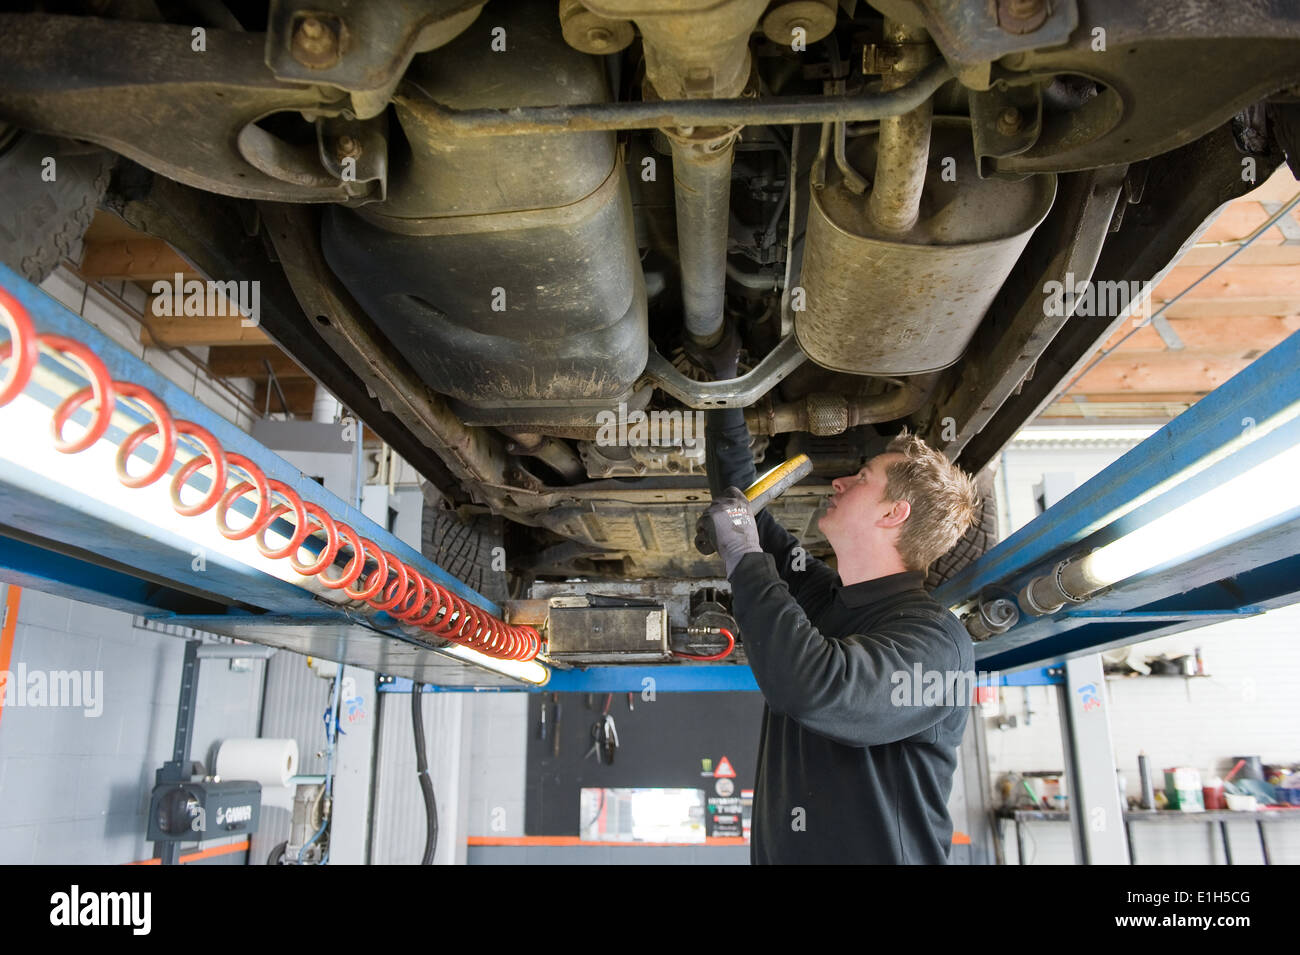 A mechanic is checking the technical state underneath a lifted car on a bridge in a garage. Stock Photo